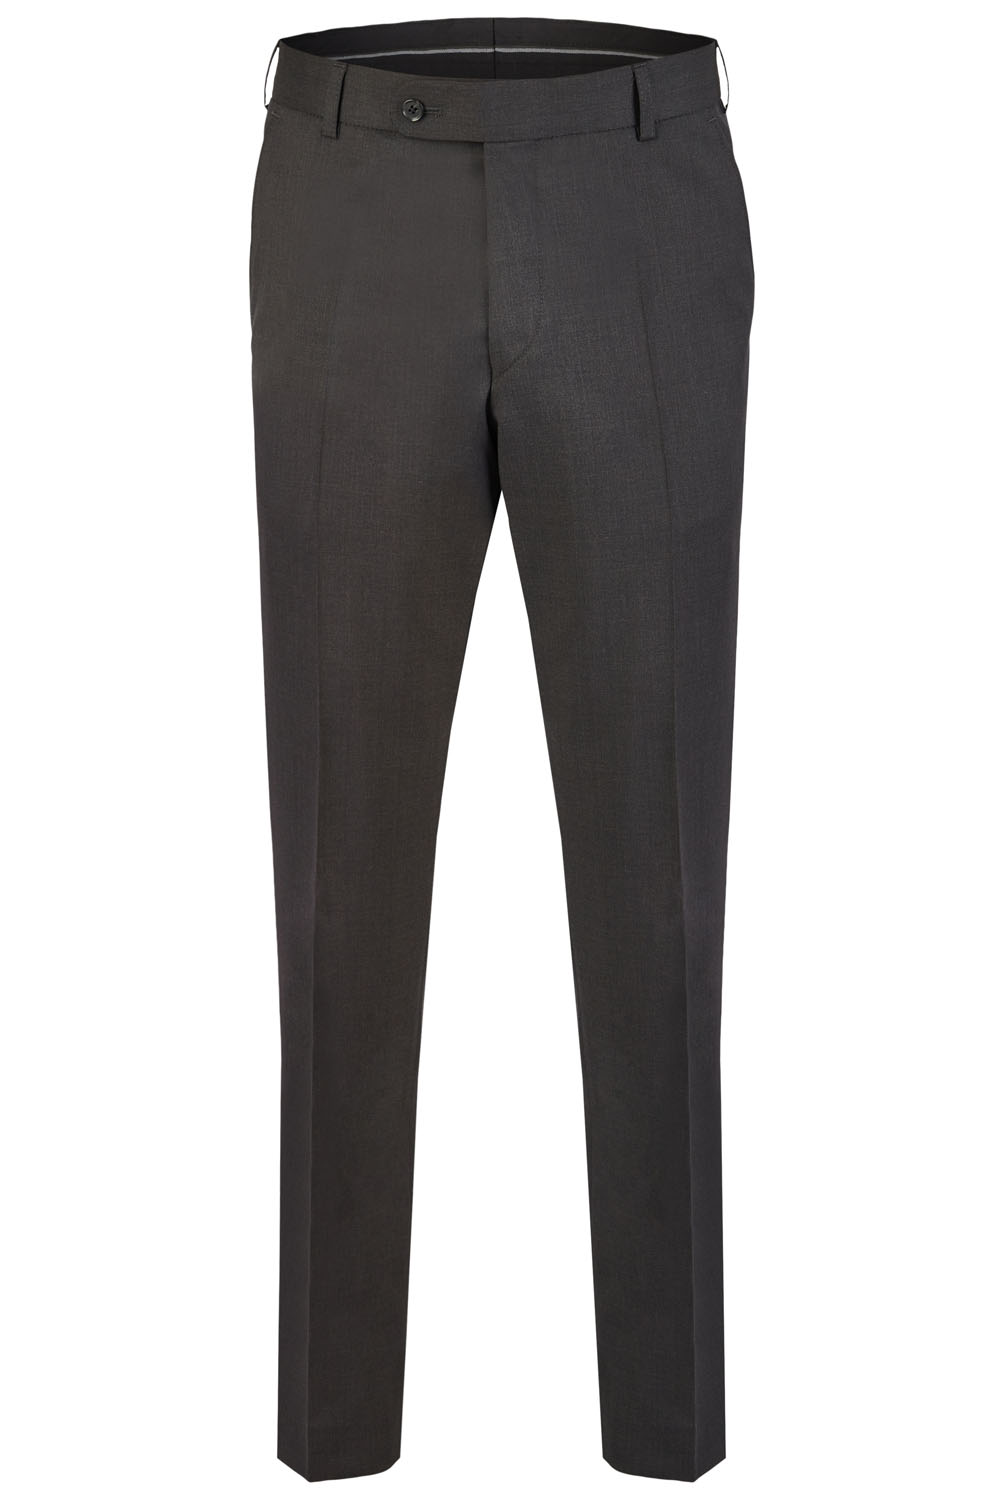 Charcoal Grey 3 Piece Suit - Tom Murphy's Formal and Menswear